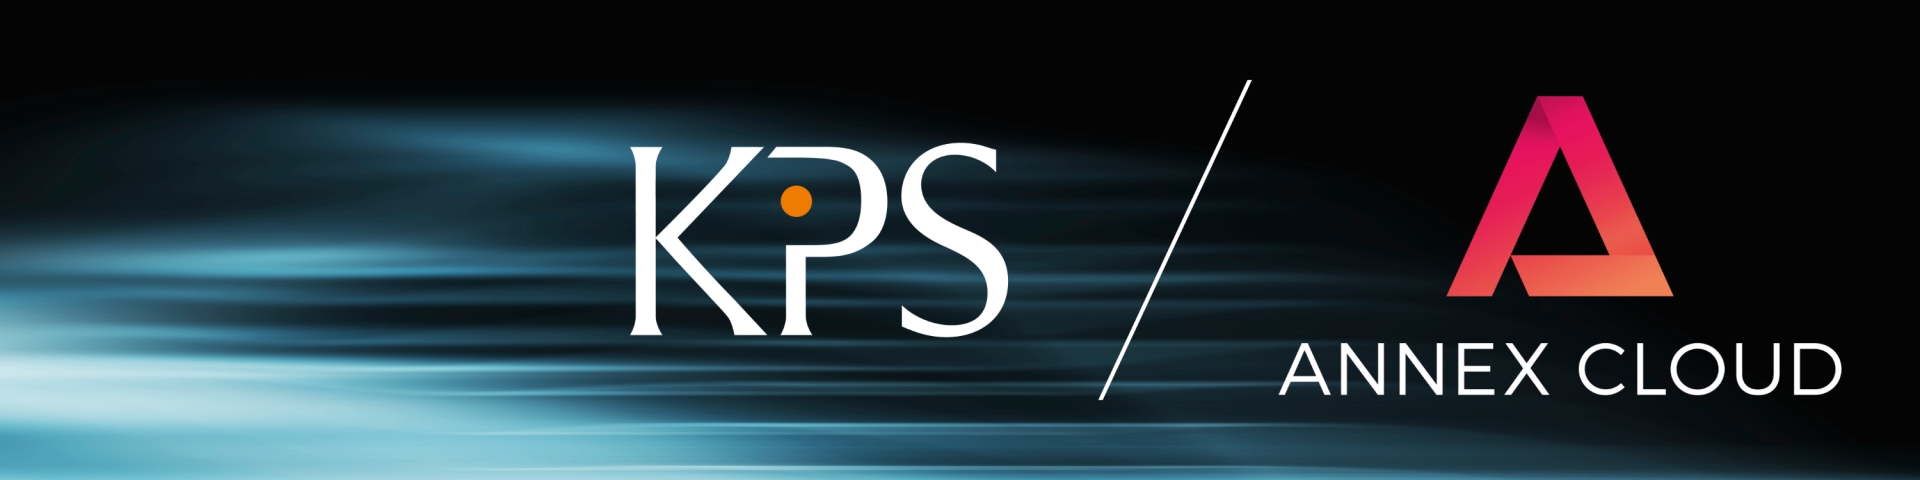 Logos of KPS and Annex Cloud on an abstract background